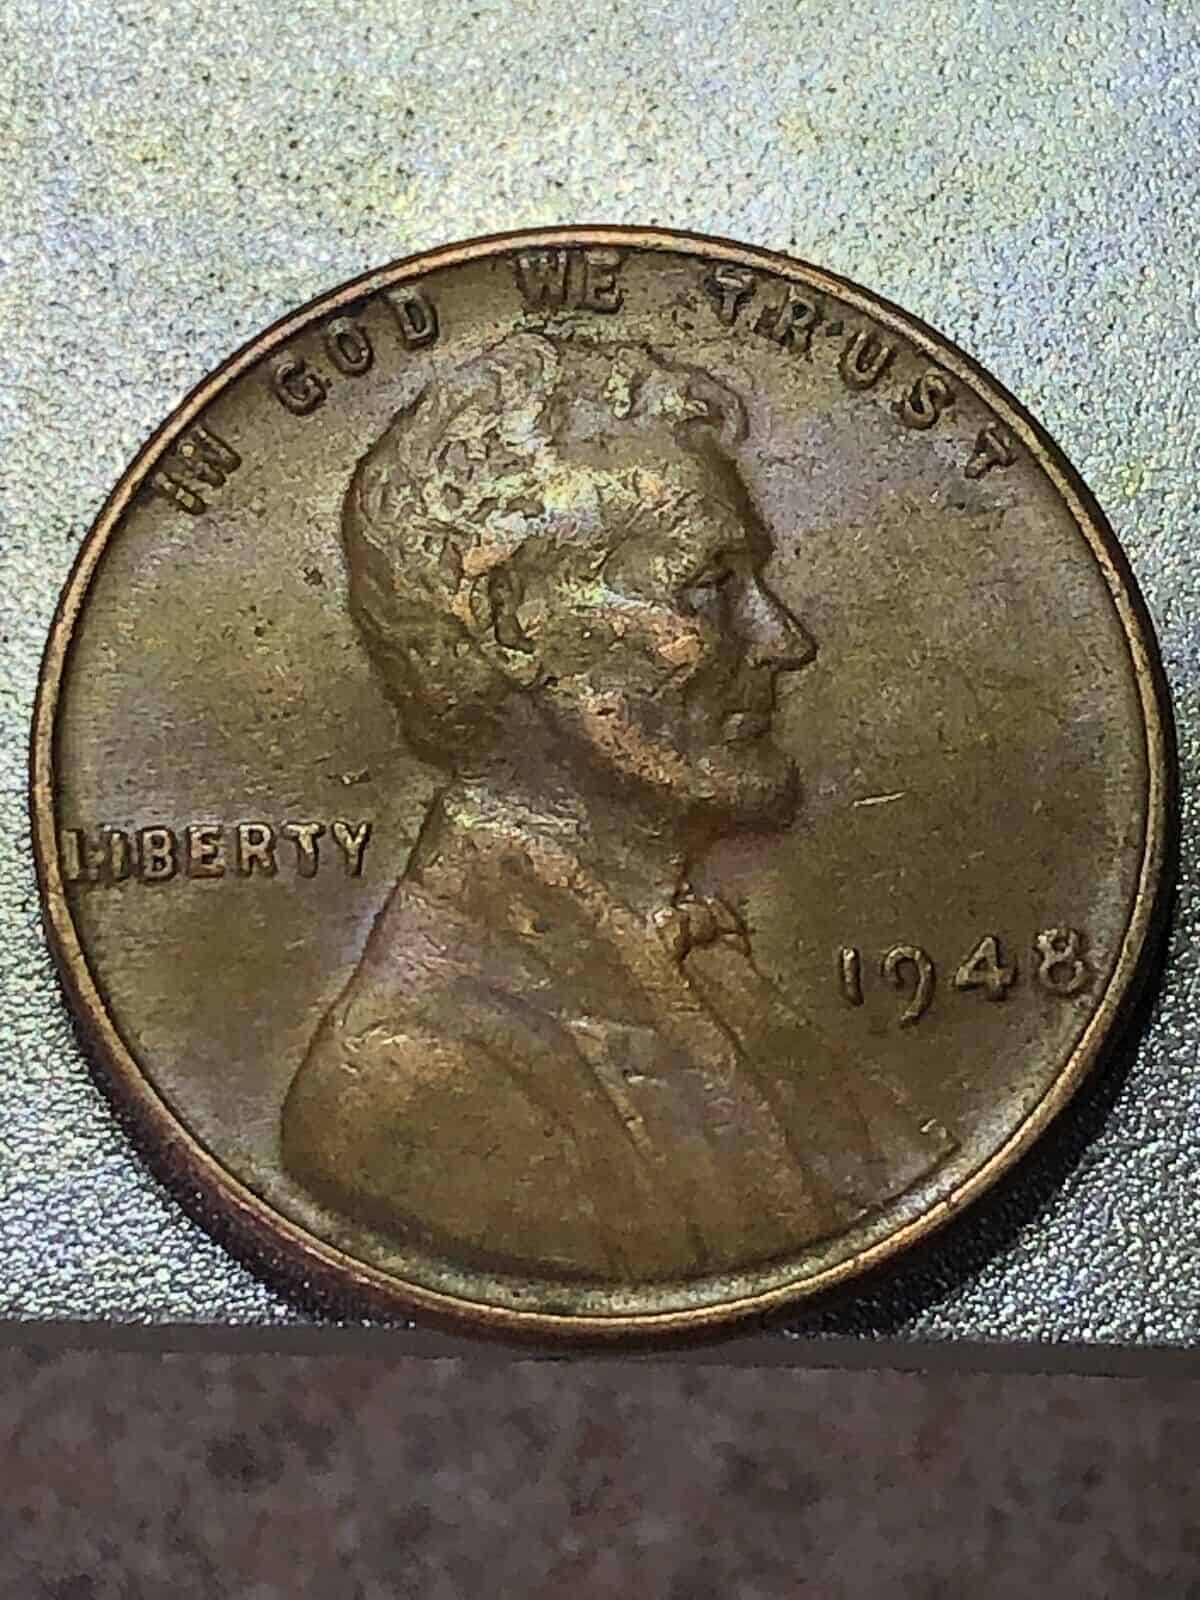 1948 Wheat Penny Doubled Die Obverse Error